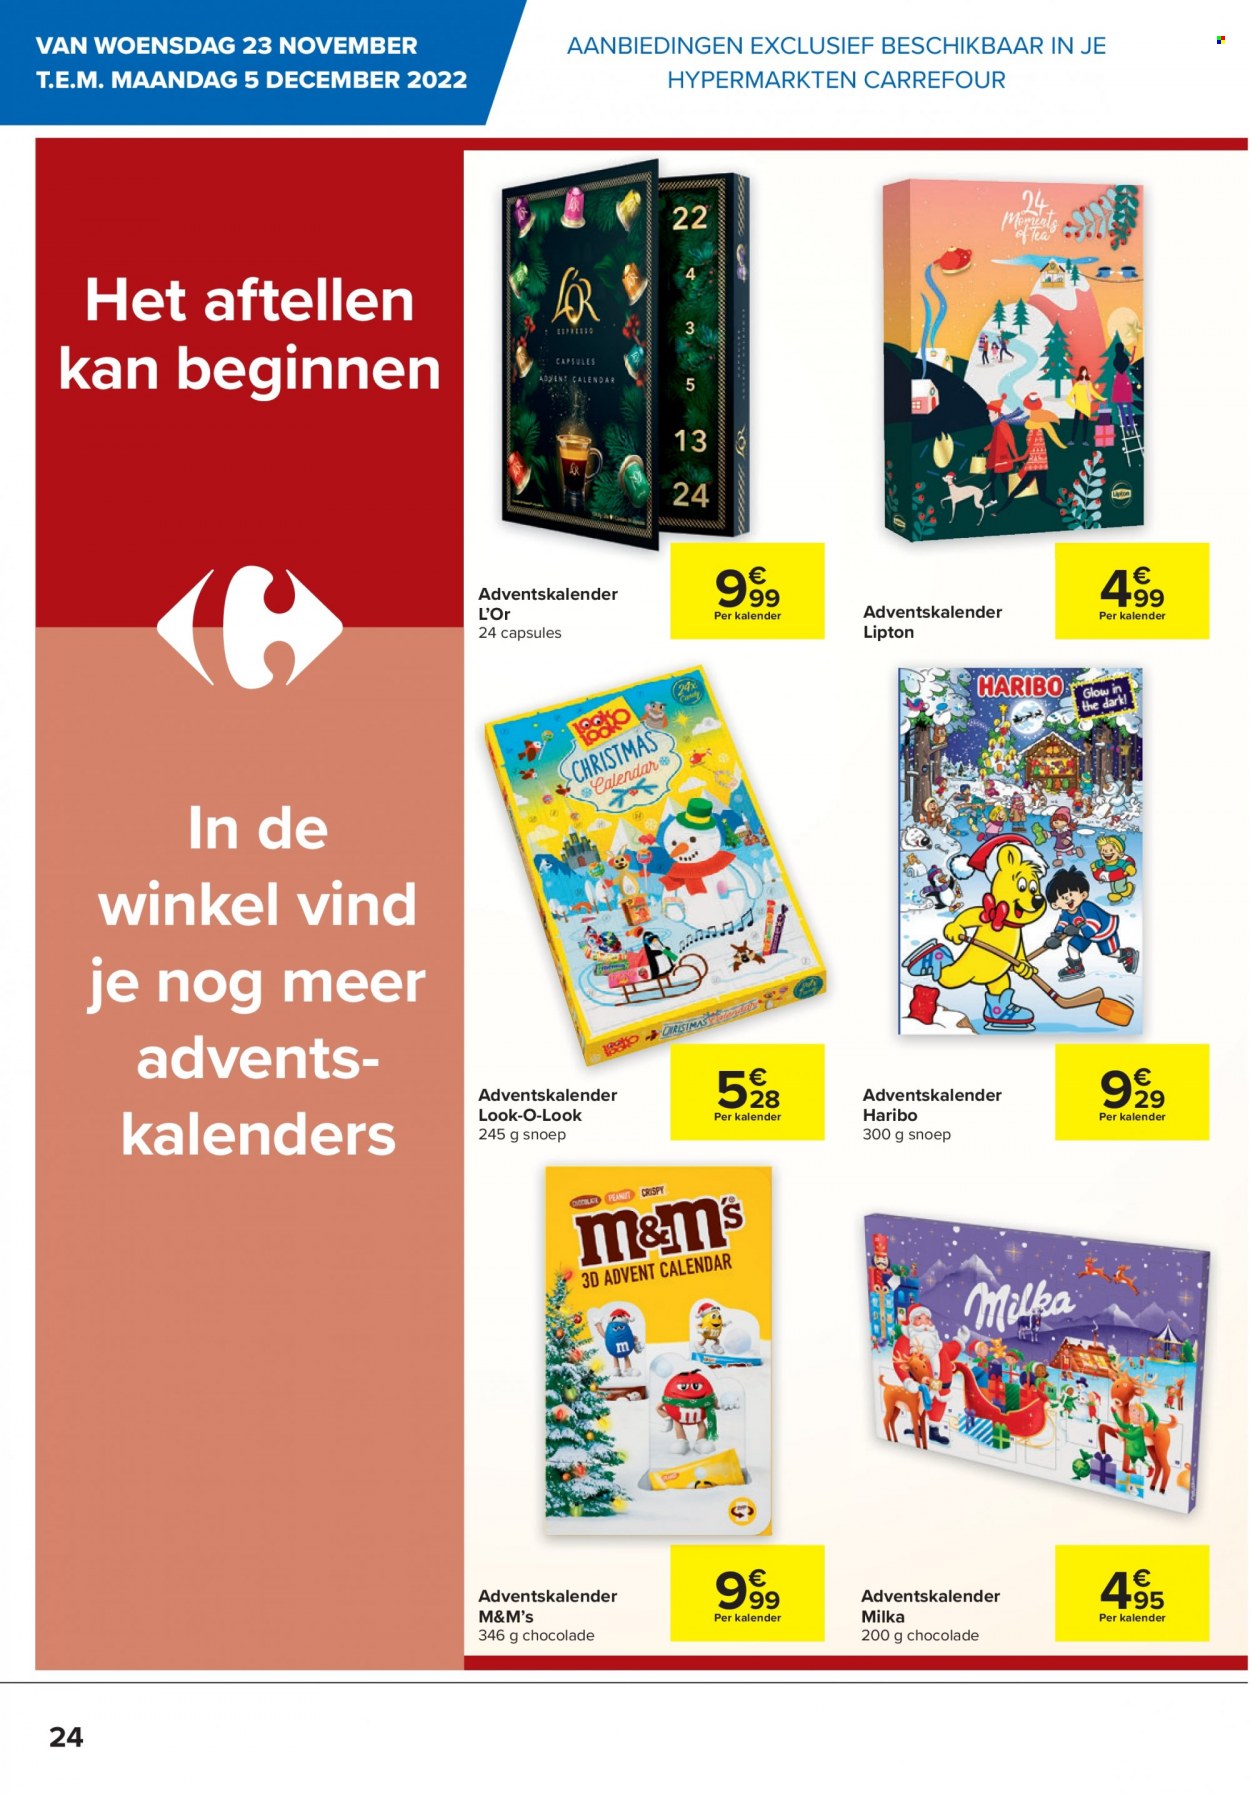 Catalogue Carrefour hypermarkt - 23.11.2022 - 5.12.2022. Page 24.